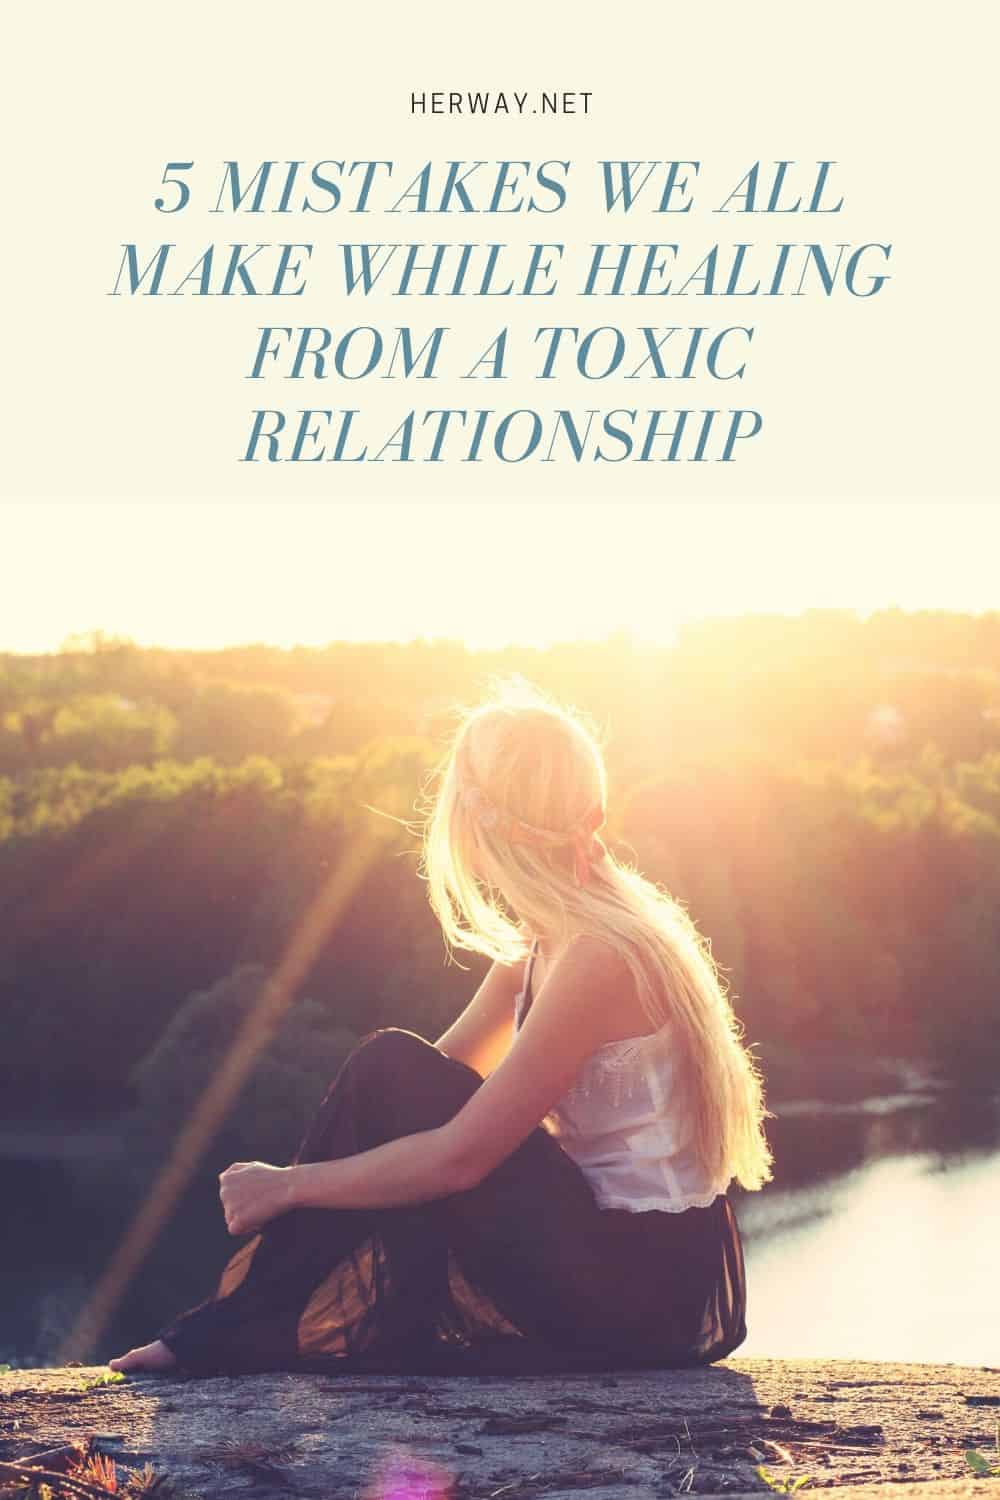 5 MISTAKES WE ALL MAKE WHILE HEALING FROM A TOXIC RELATIONSHIP